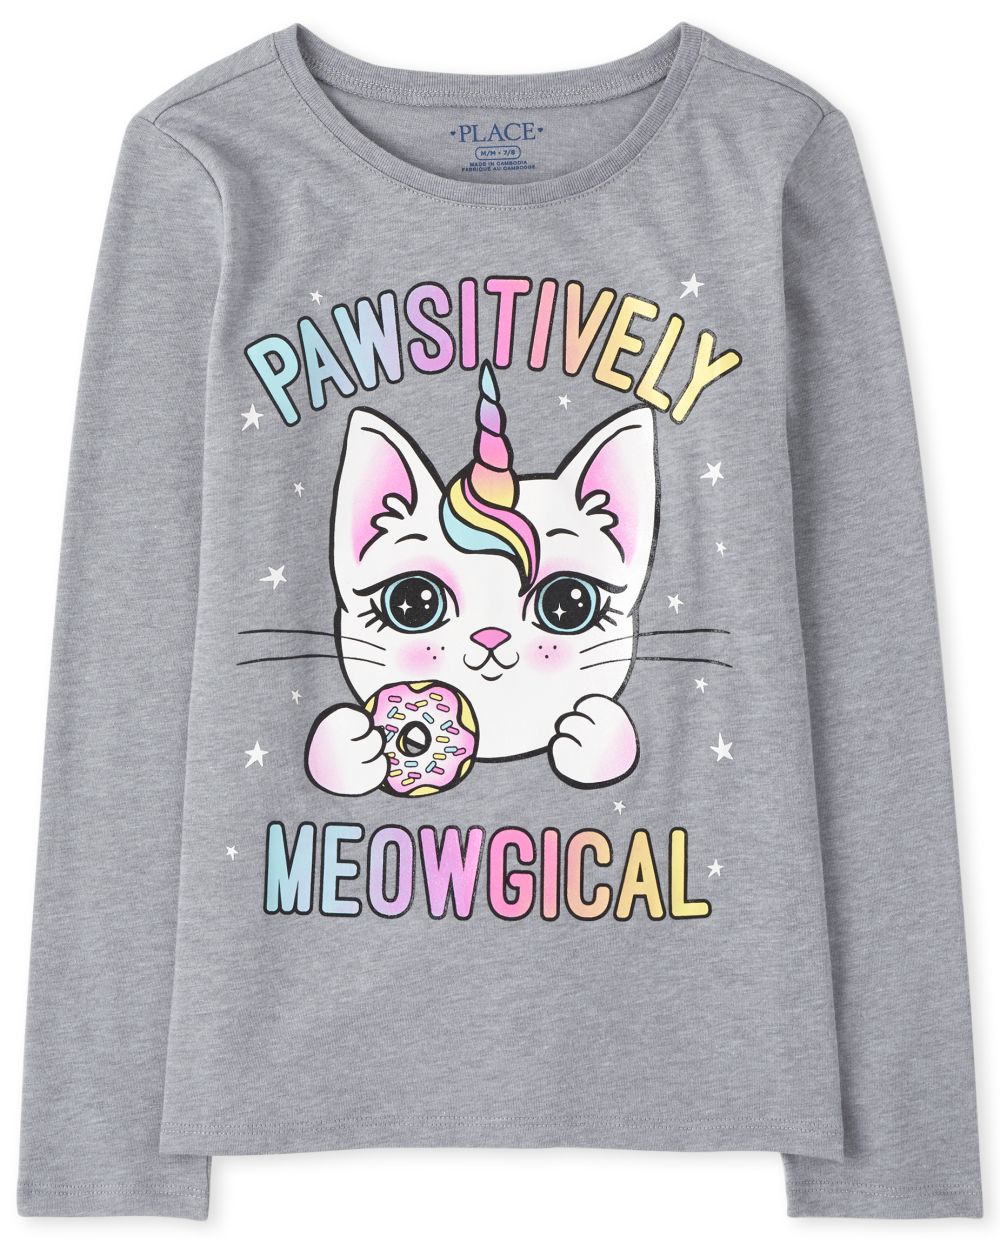 

Girls Meowgical Graphic Tee - Gray T-Shirt - The Children's Place